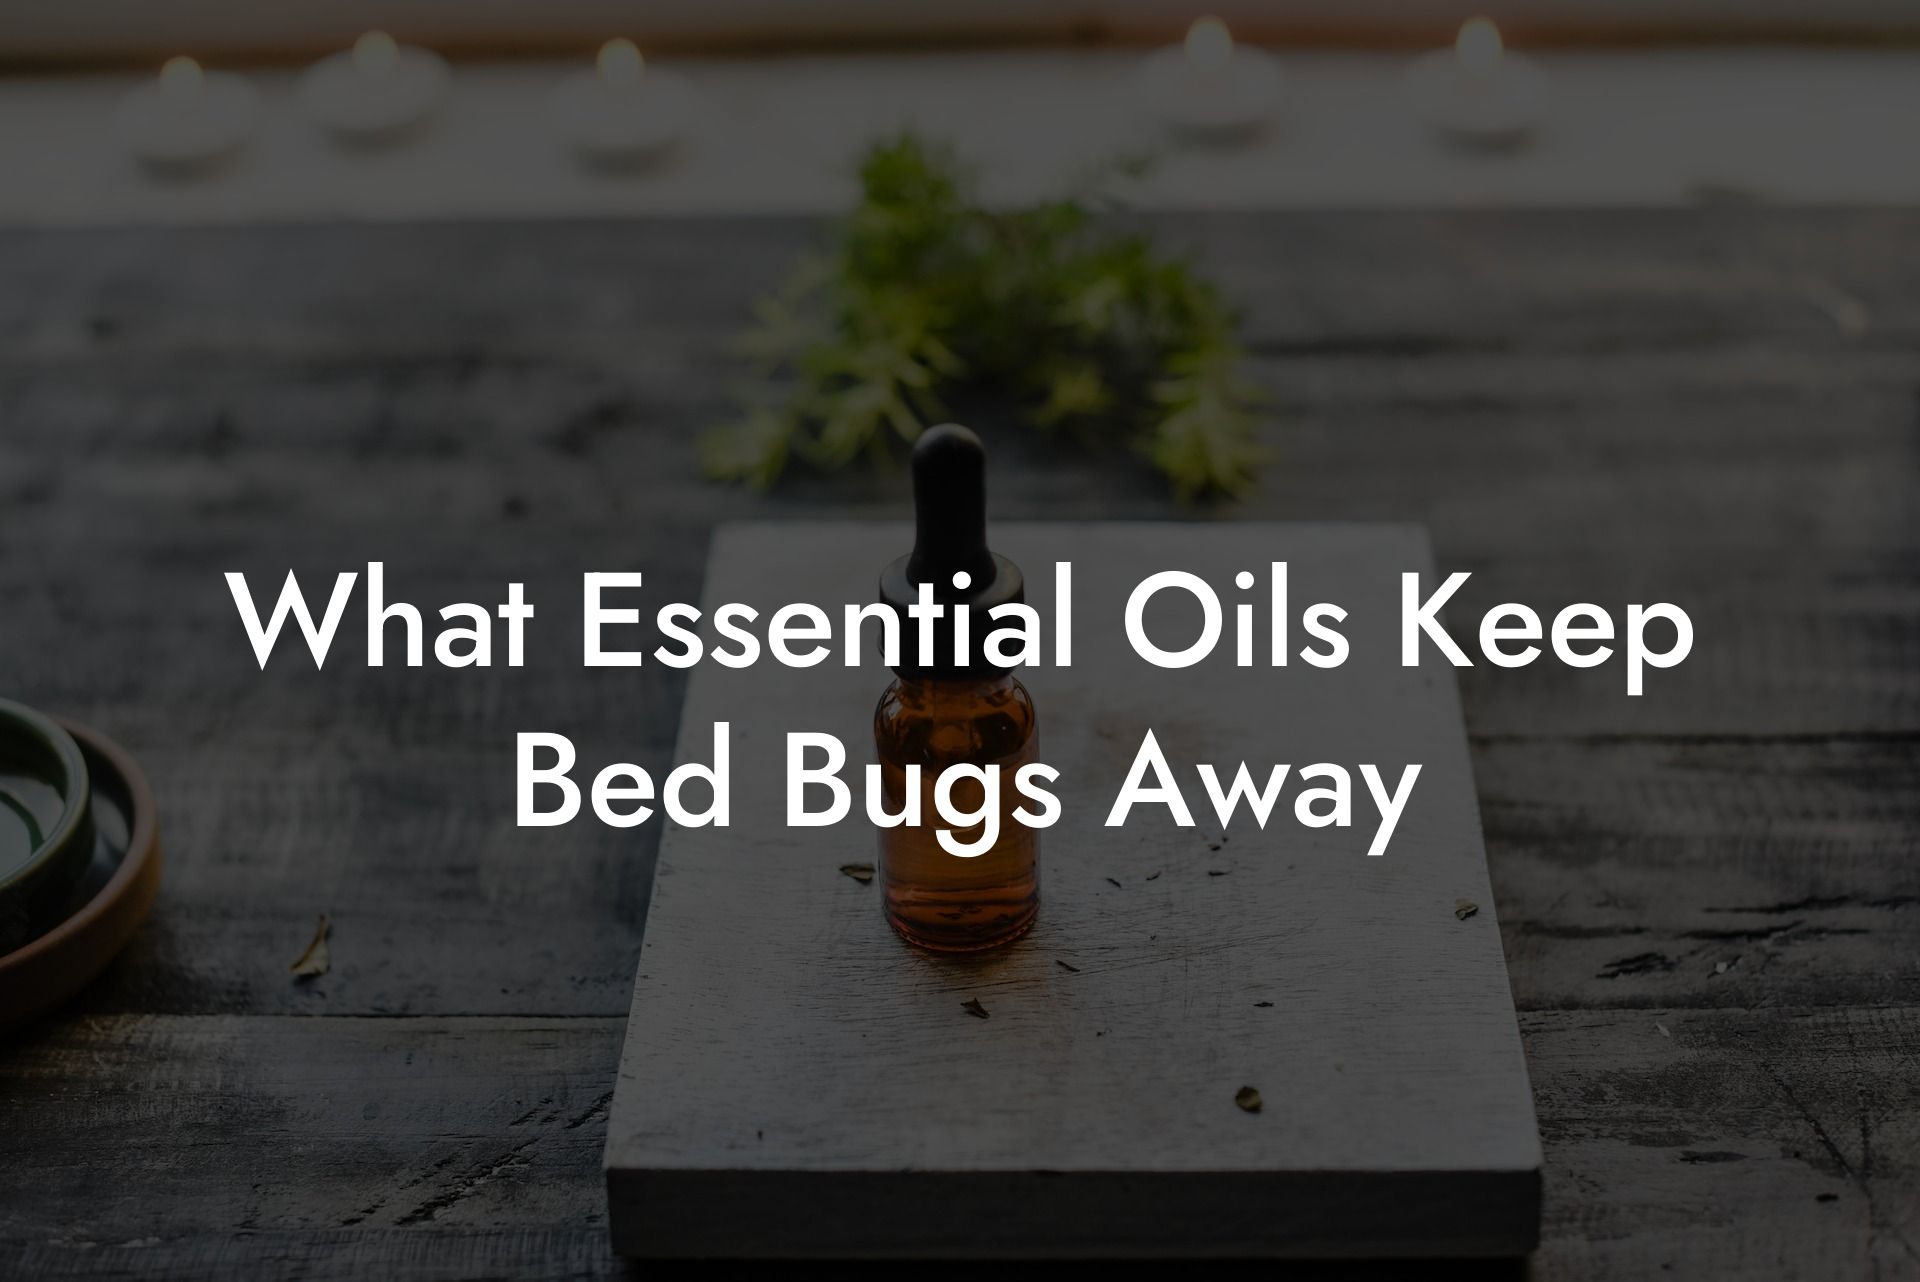 What Essential Oils Keep Bed Bugs Away